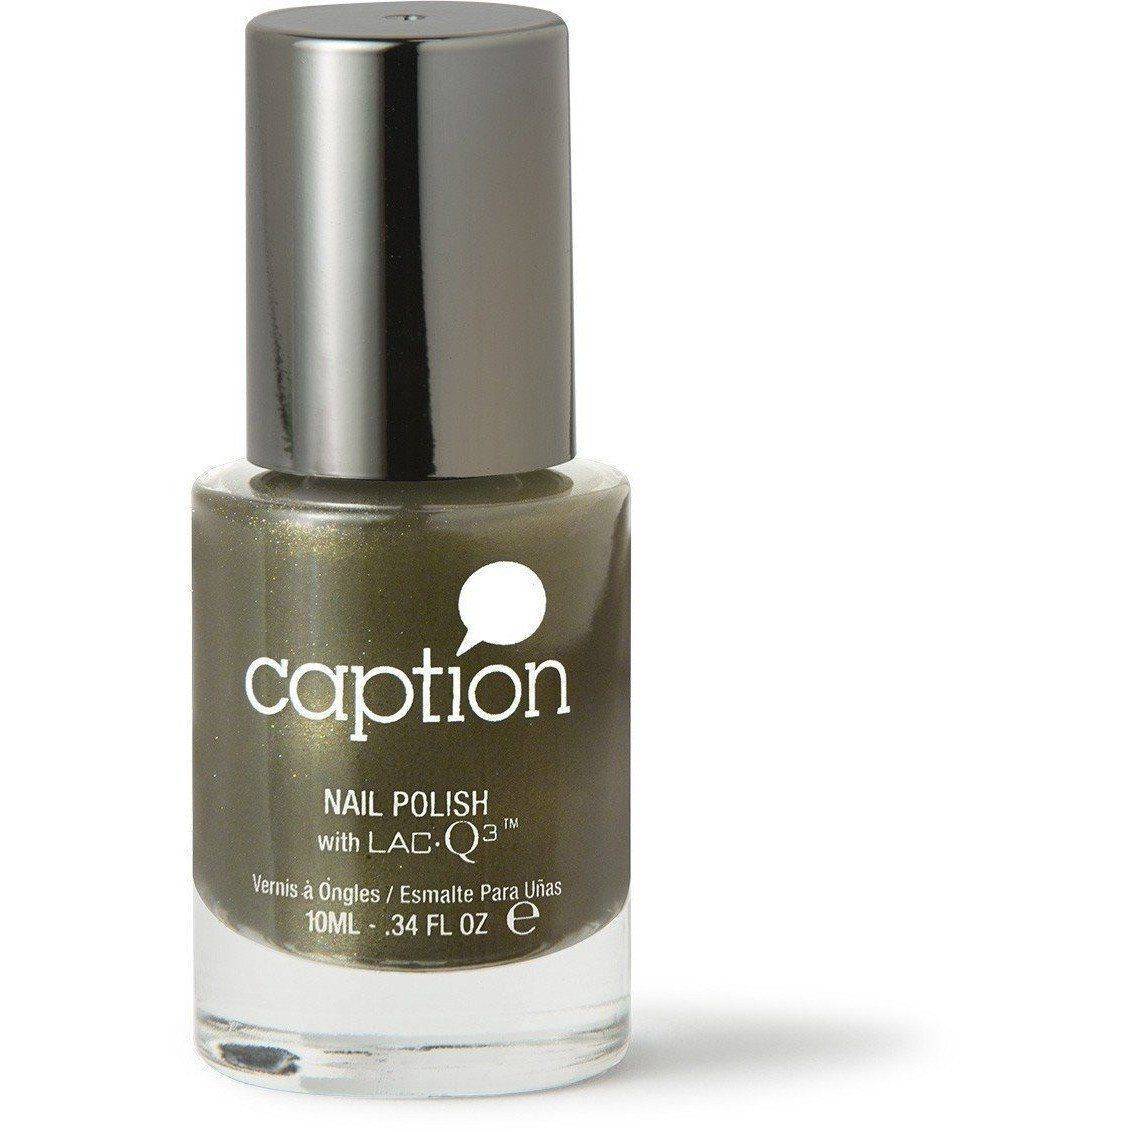 Caption - Pining For Spring  #C025 - Universal Nail Supplies